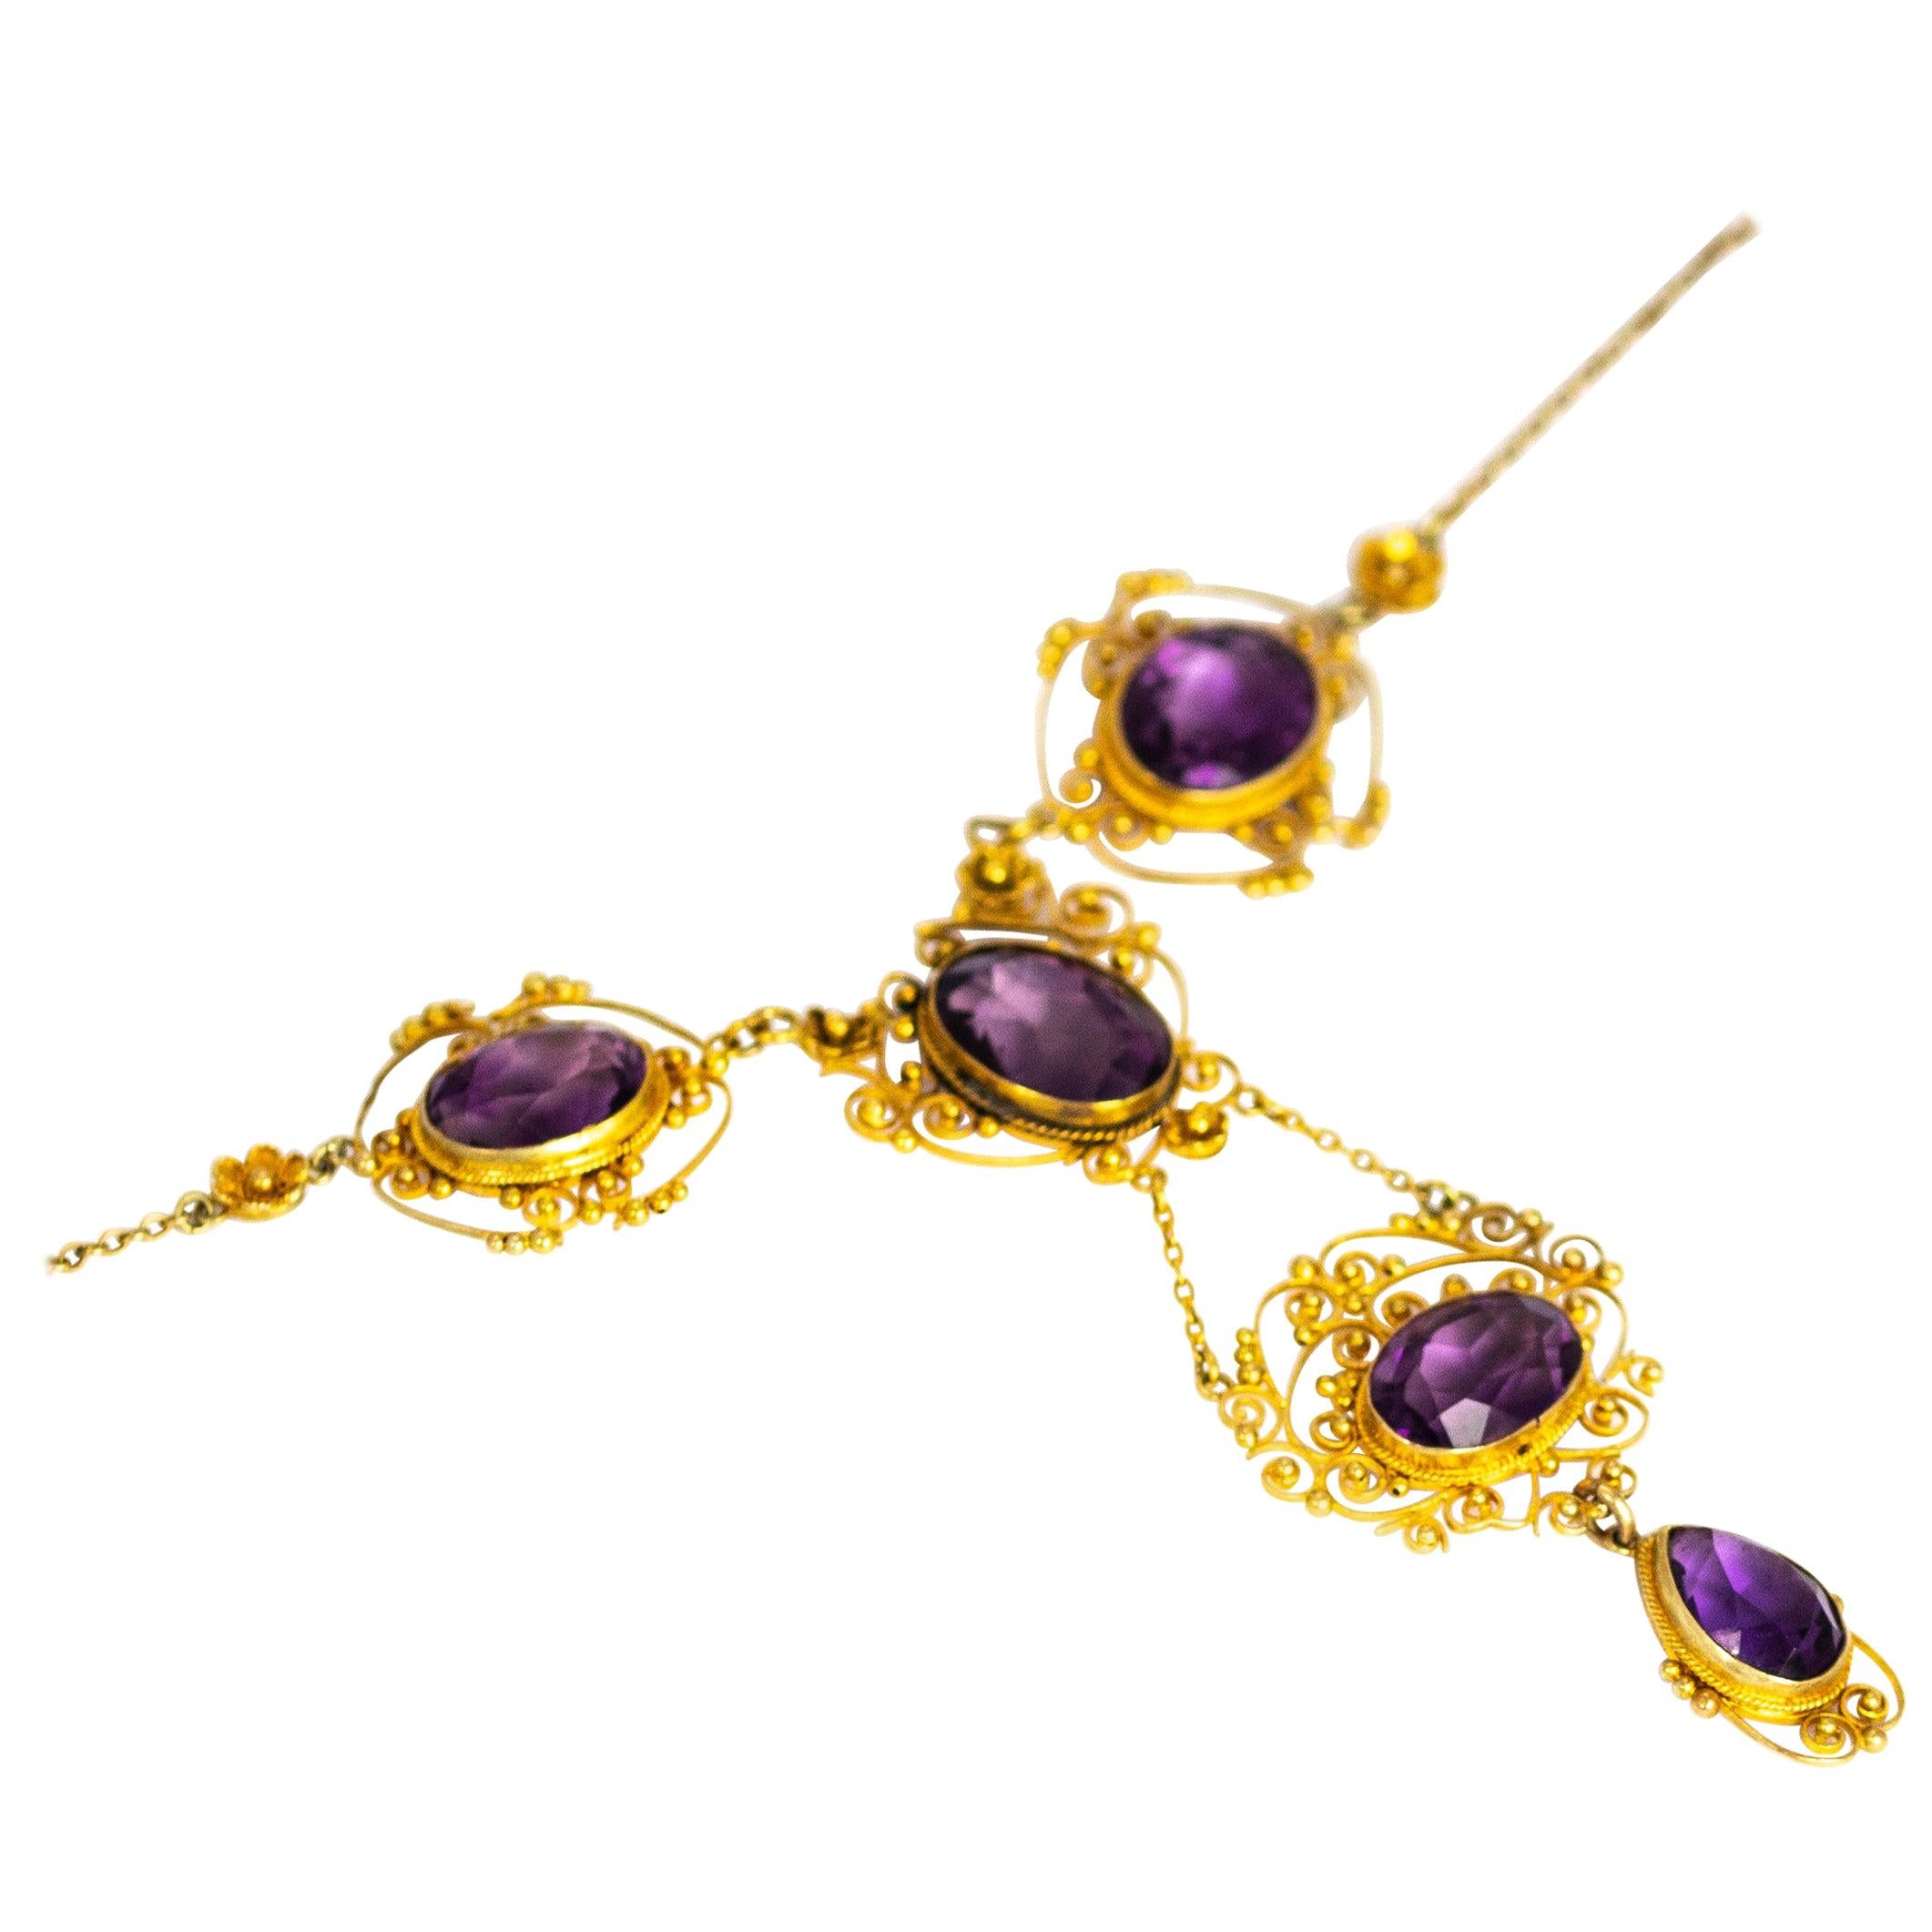 Victorian Amethyst and 15 Carat Gold Filagree Necklace